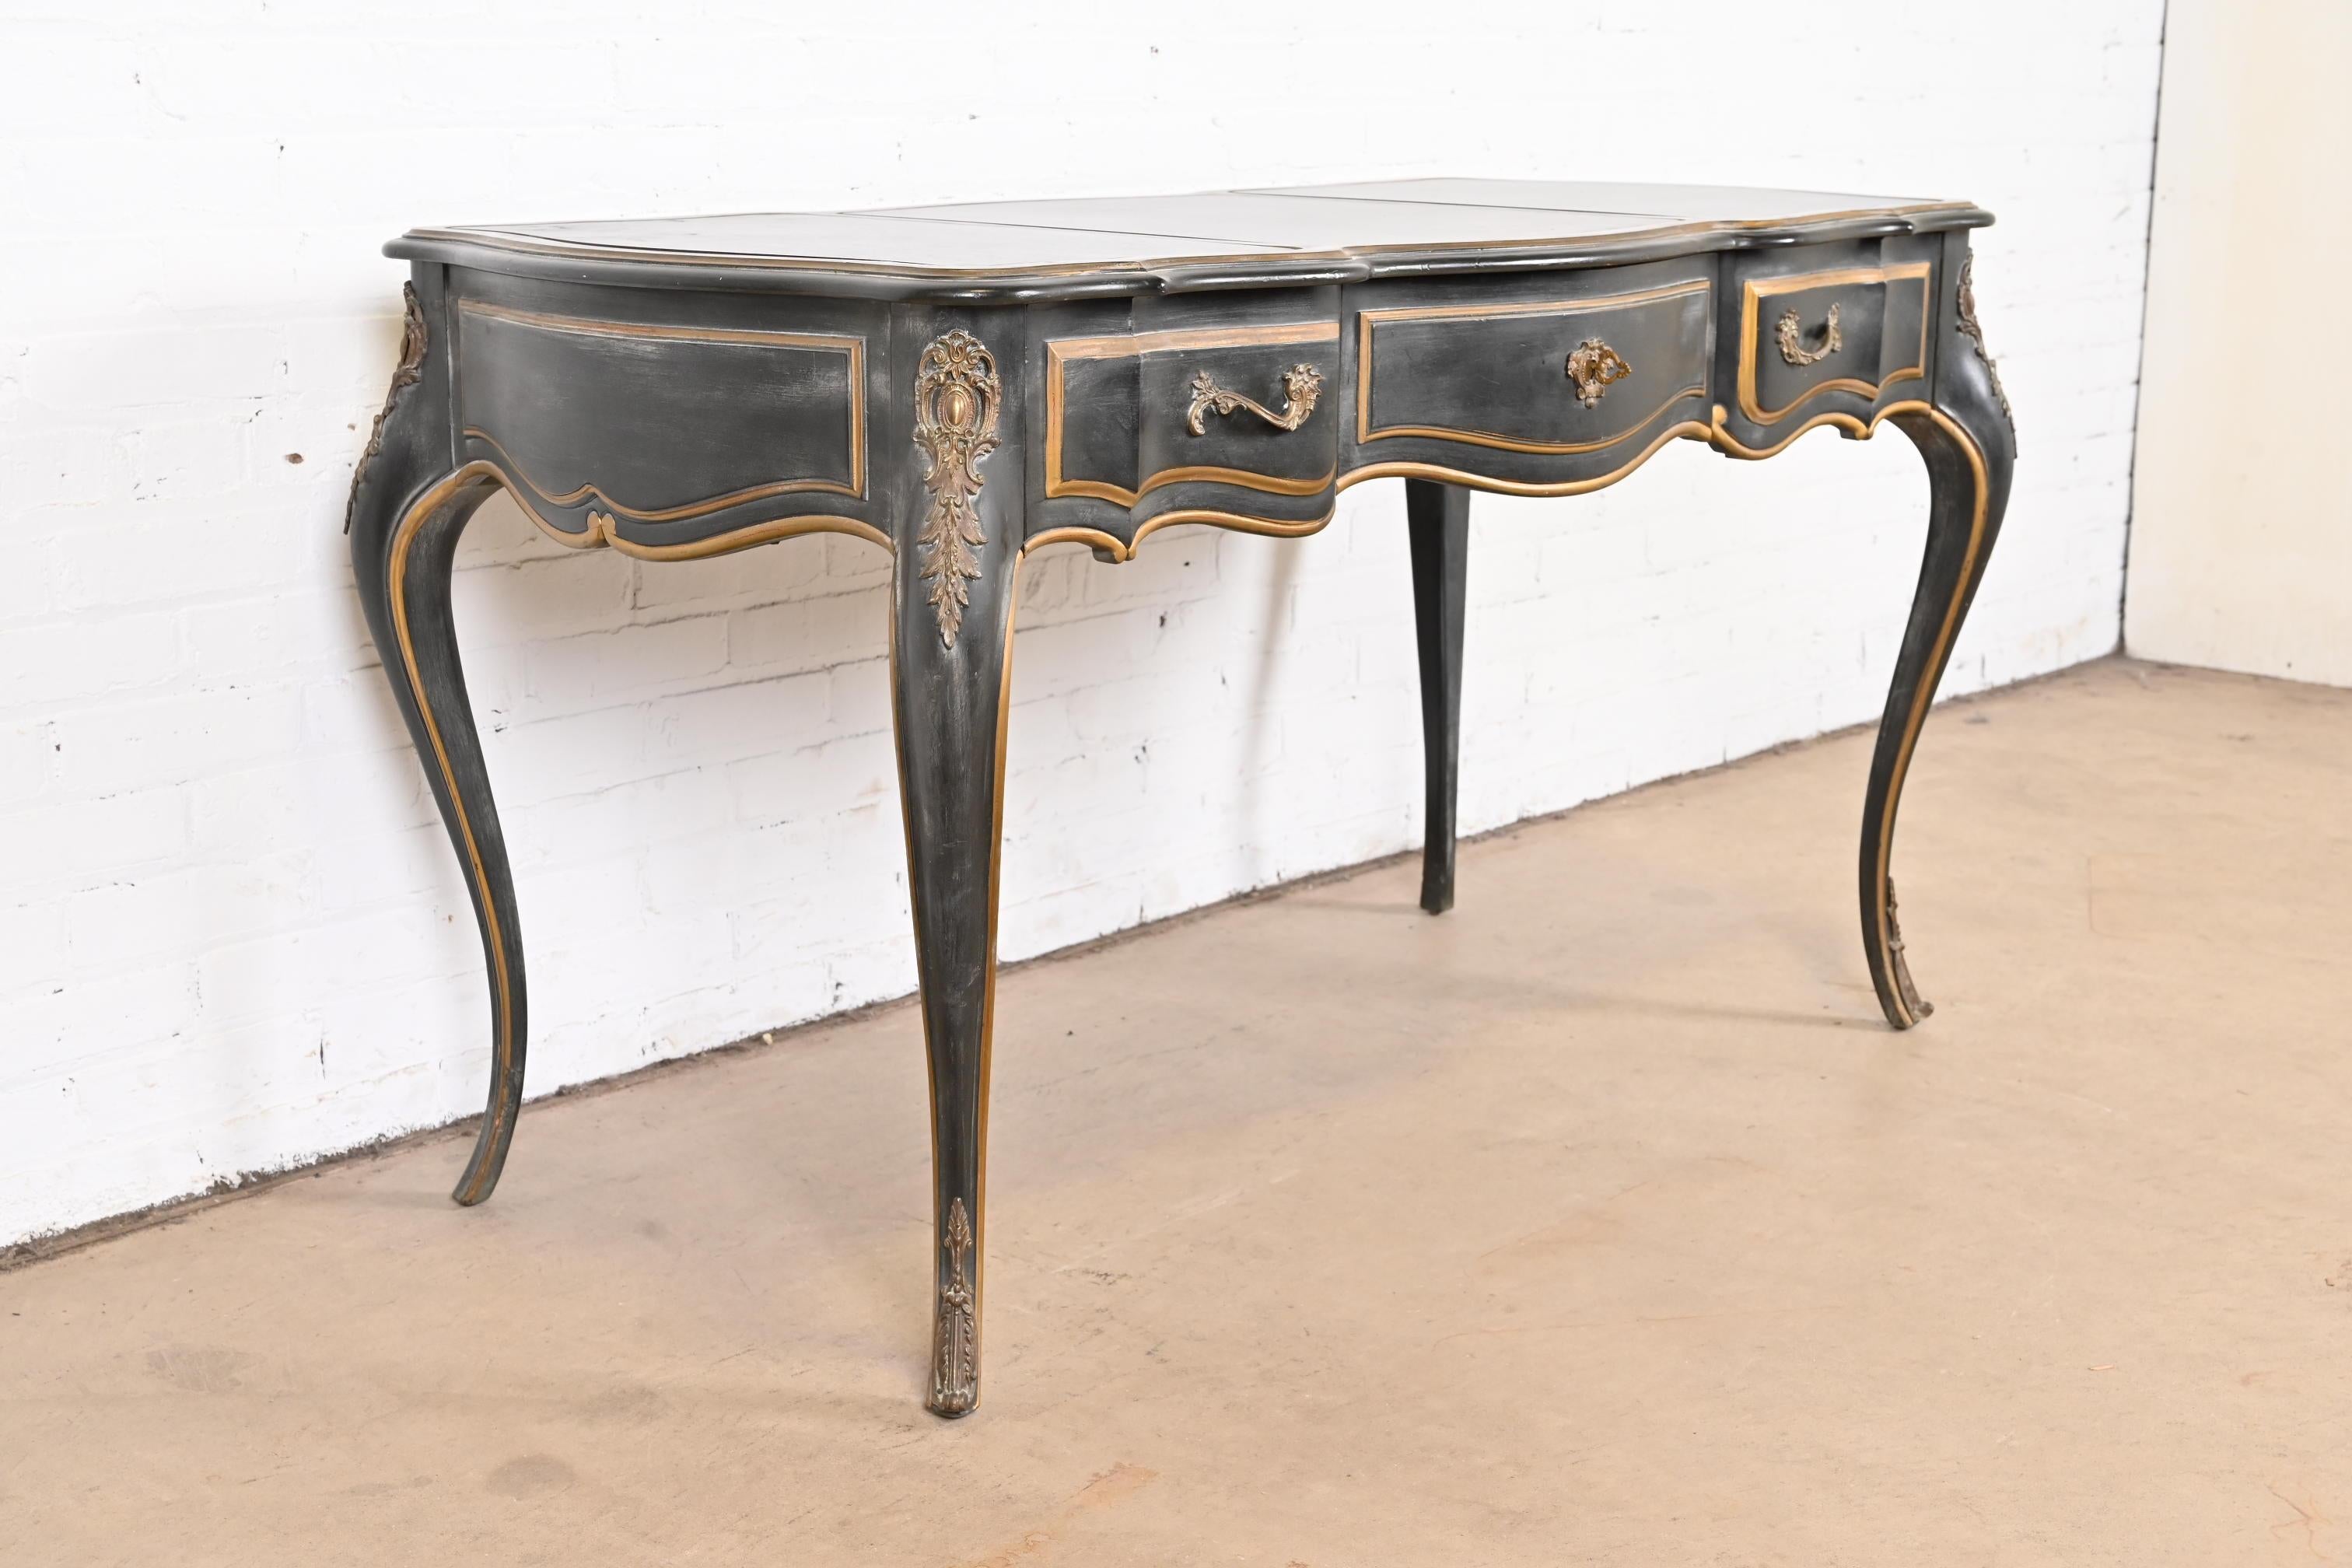 Bronze French Louis XV Bureau Plat Desk with Ormolu and Faux Marble Top by Drexel